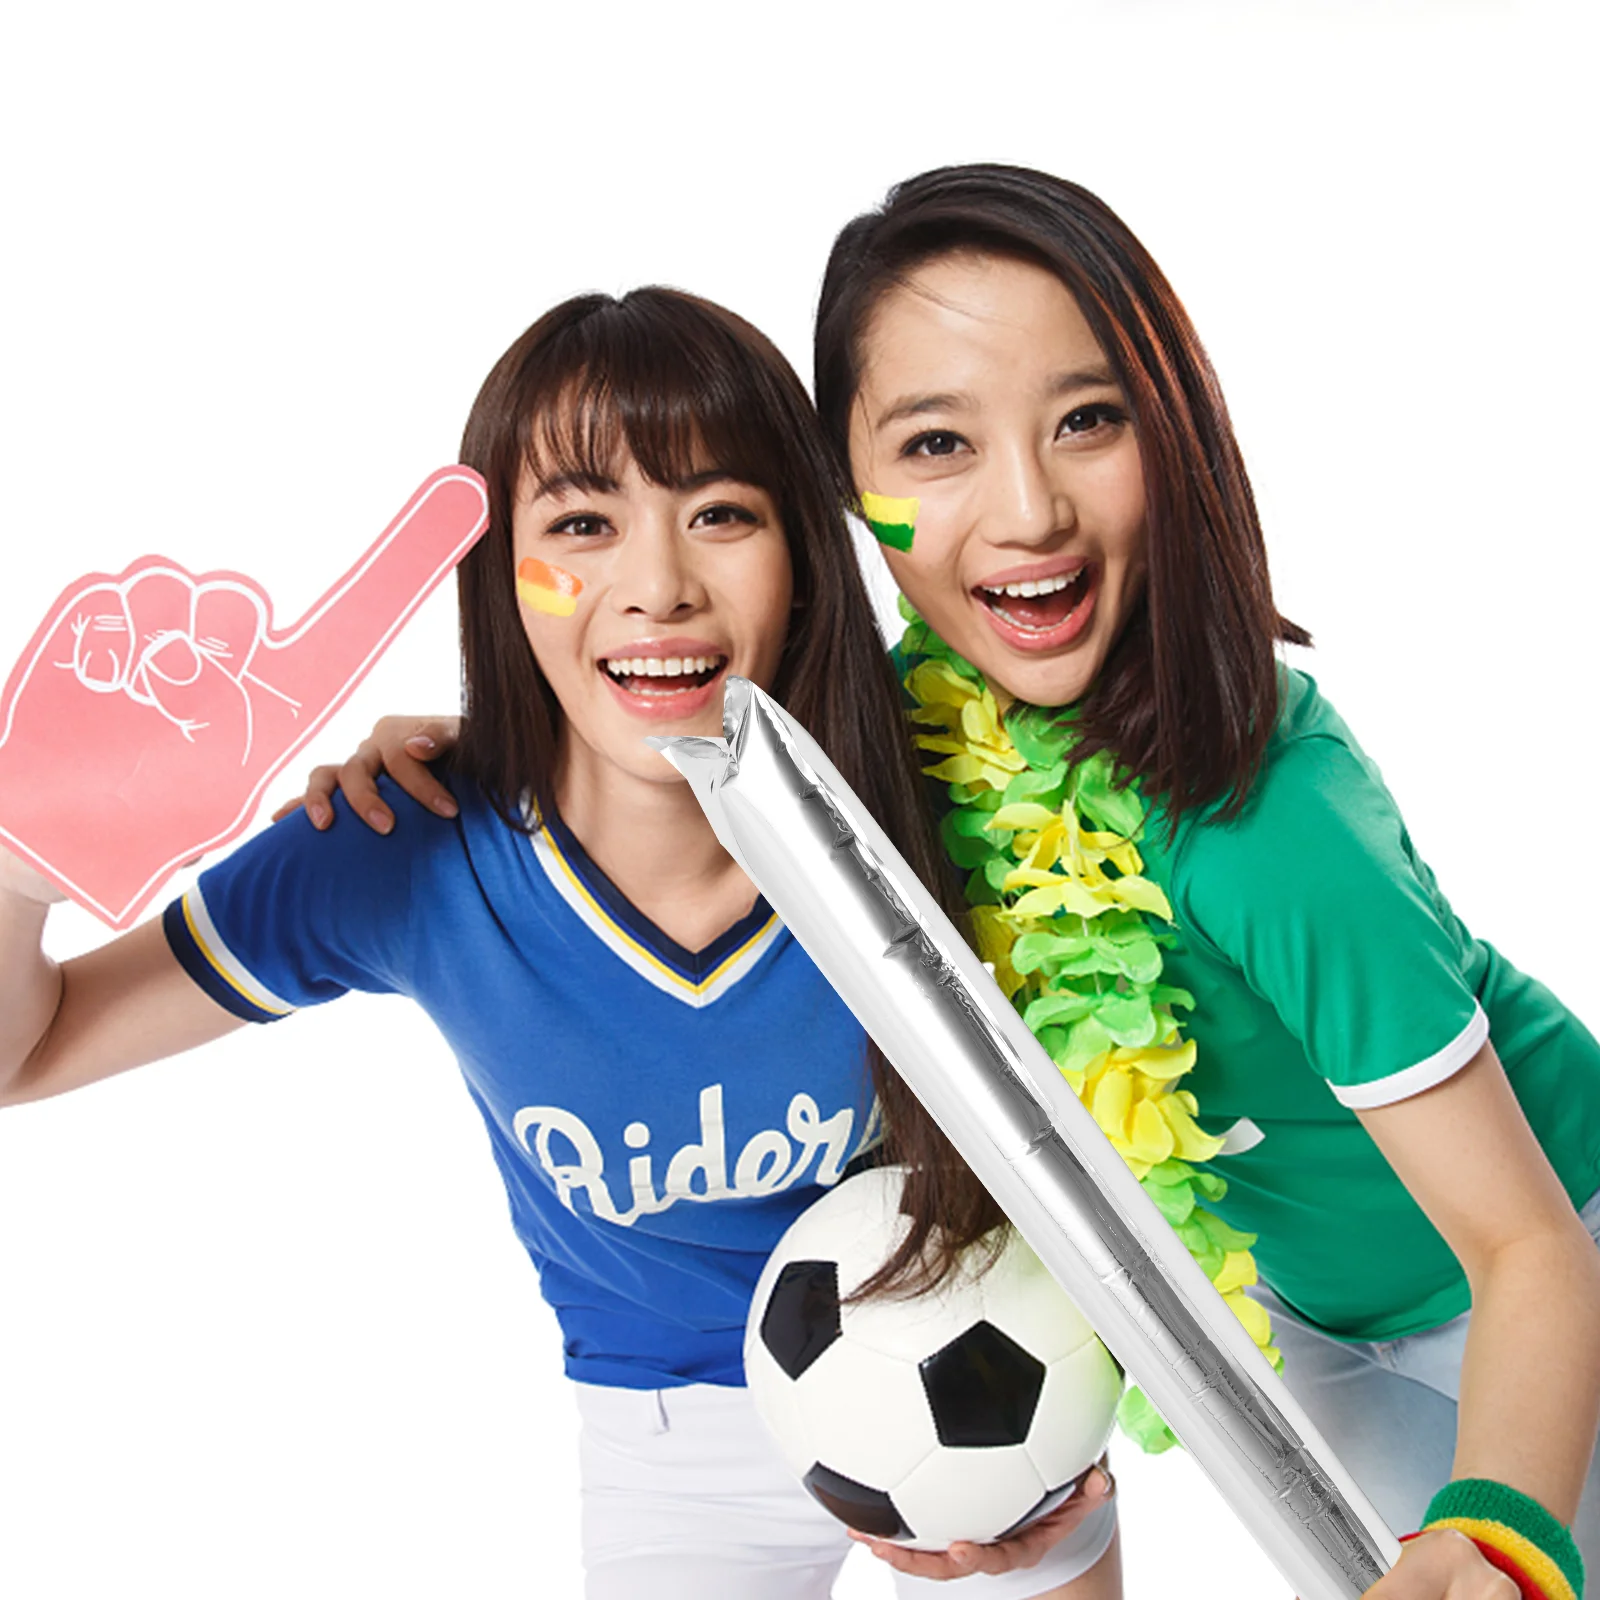 

Thunder Sticks Cheering Thunder Sticks Clapper Inflatable Noise Makers Concerts sports competitions Applauders Animation